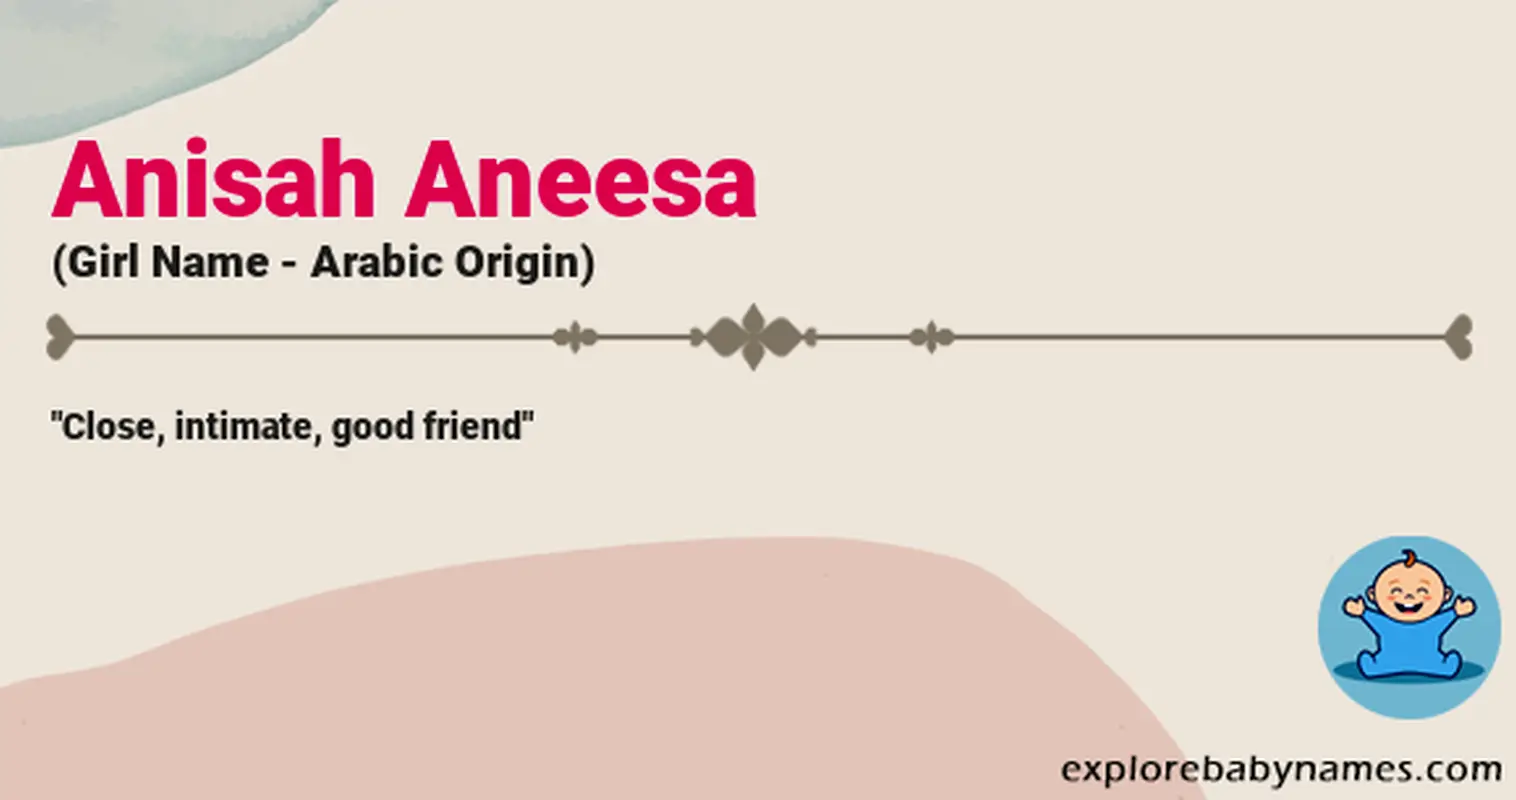 Meaning of Anisah Aneesa